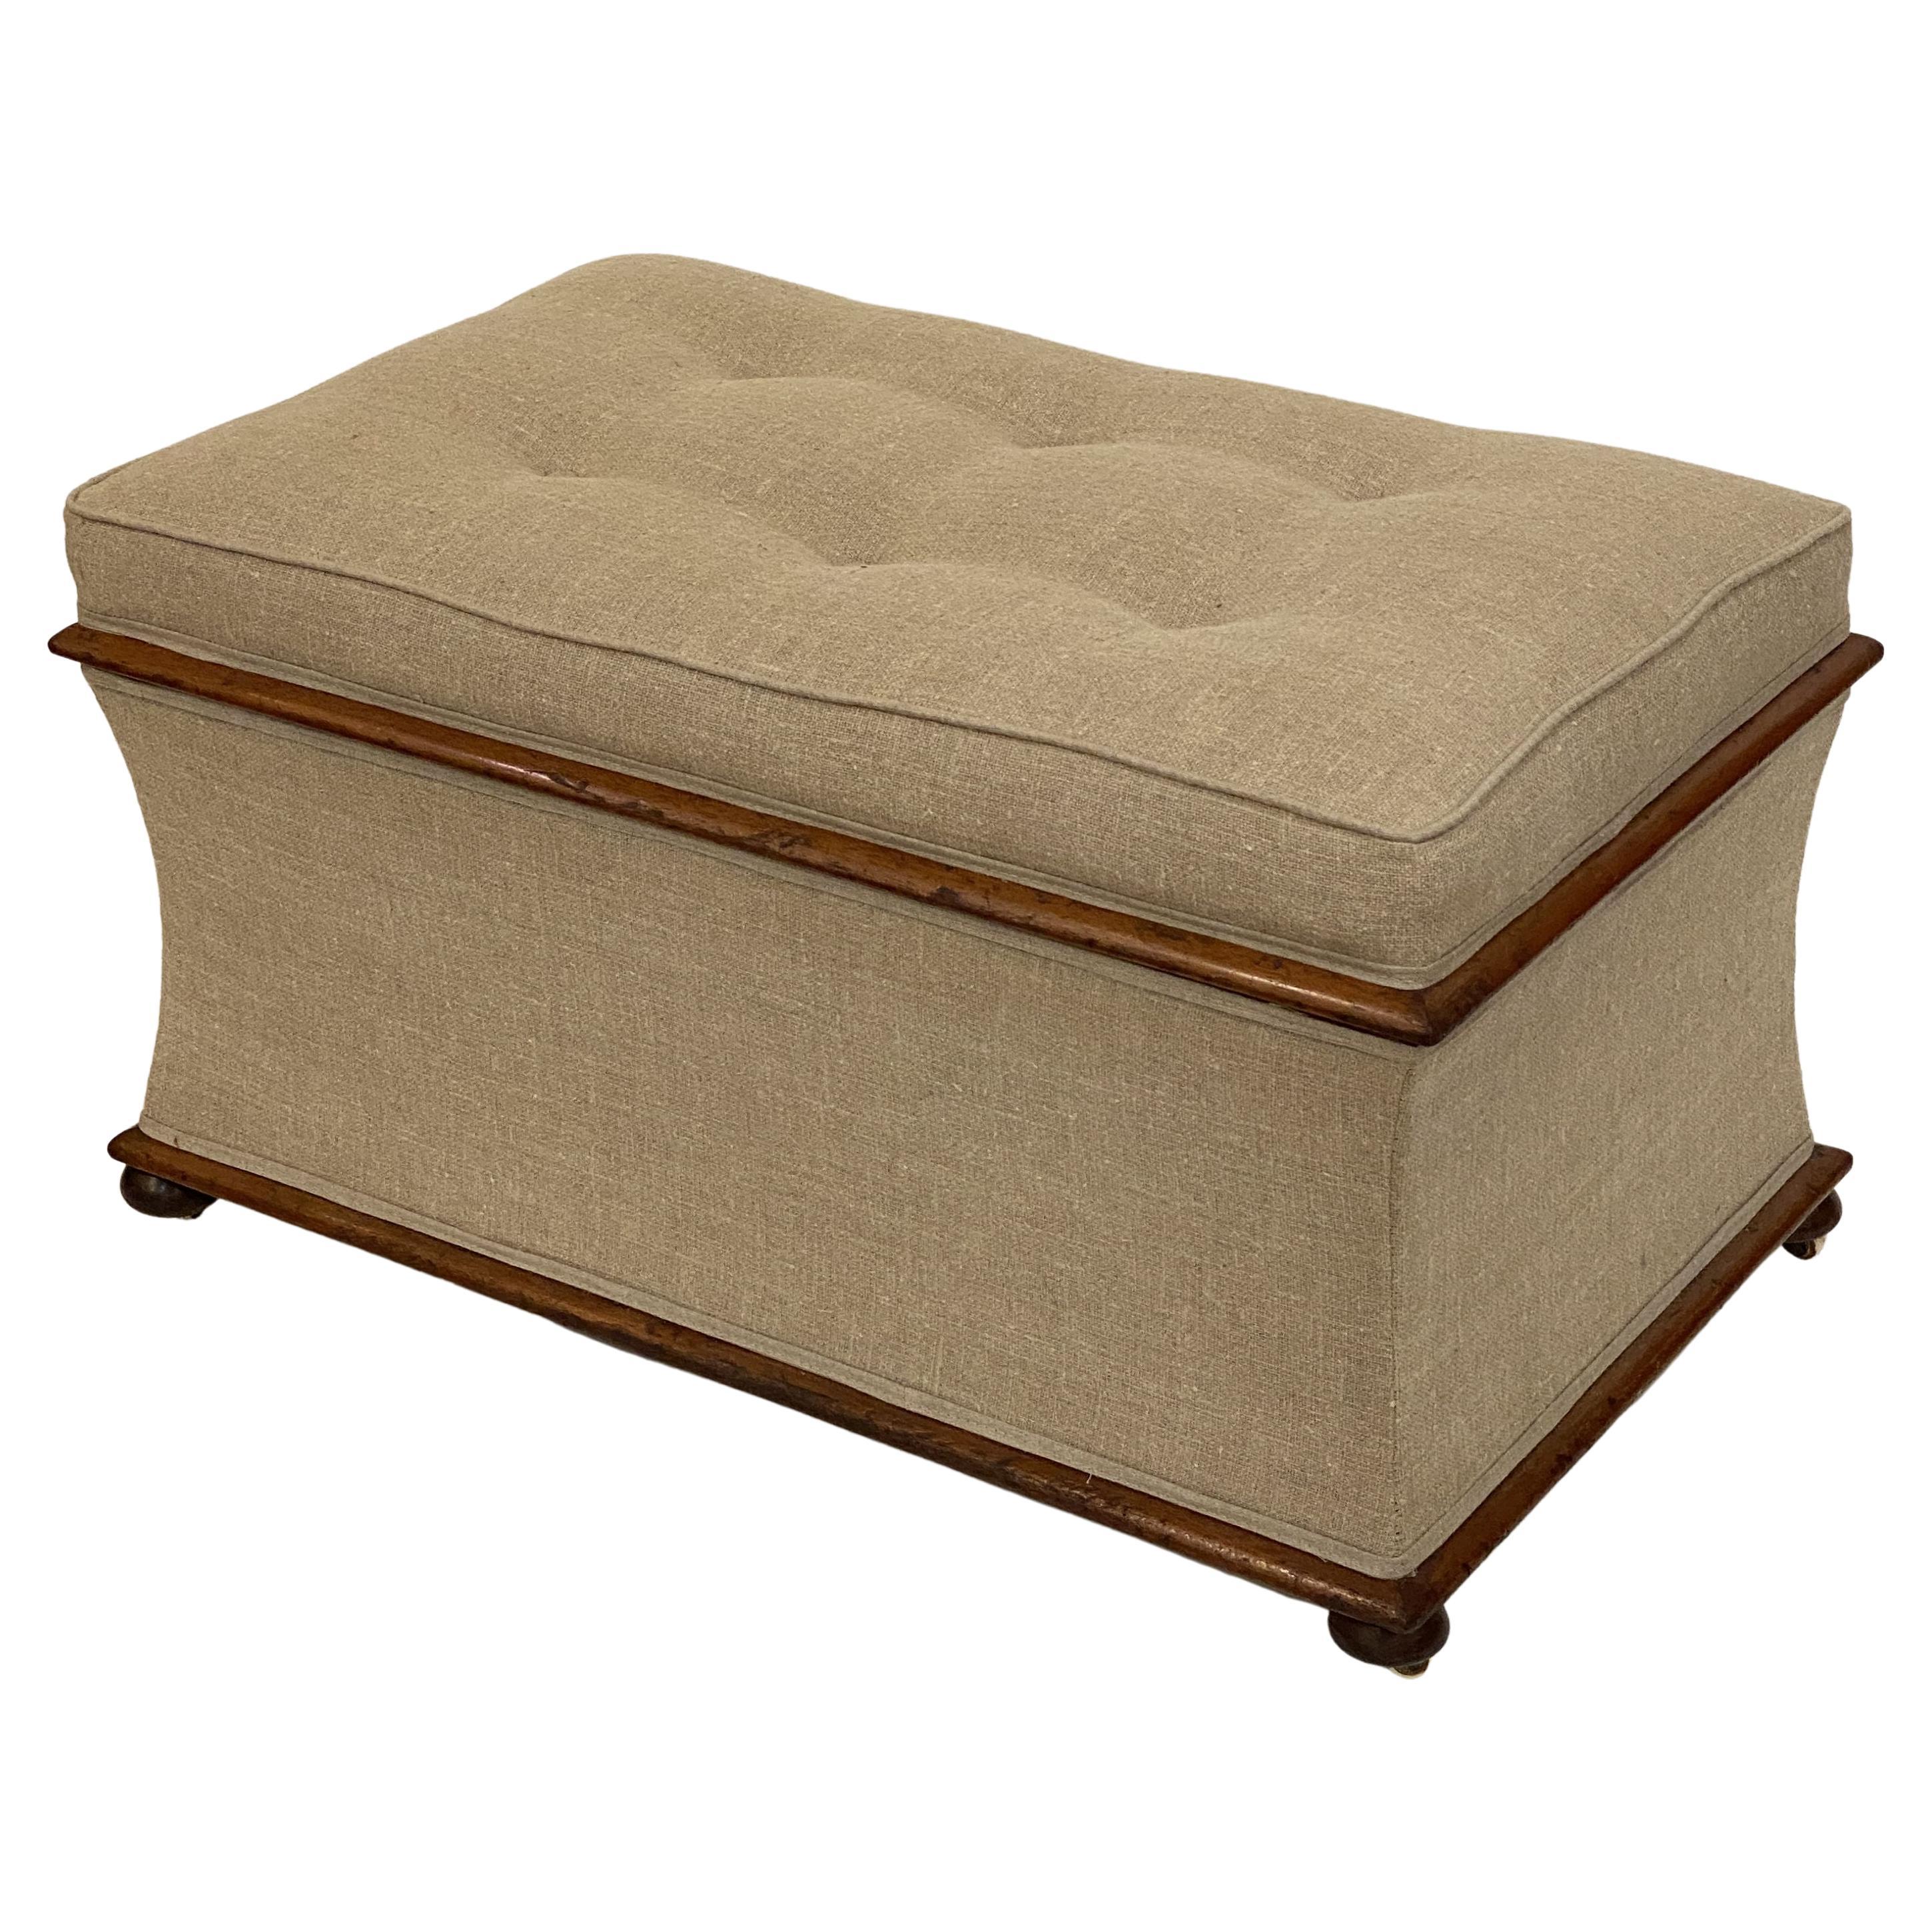 English Upholstered Trunk or Pouffe Ottoman Seat on Casters